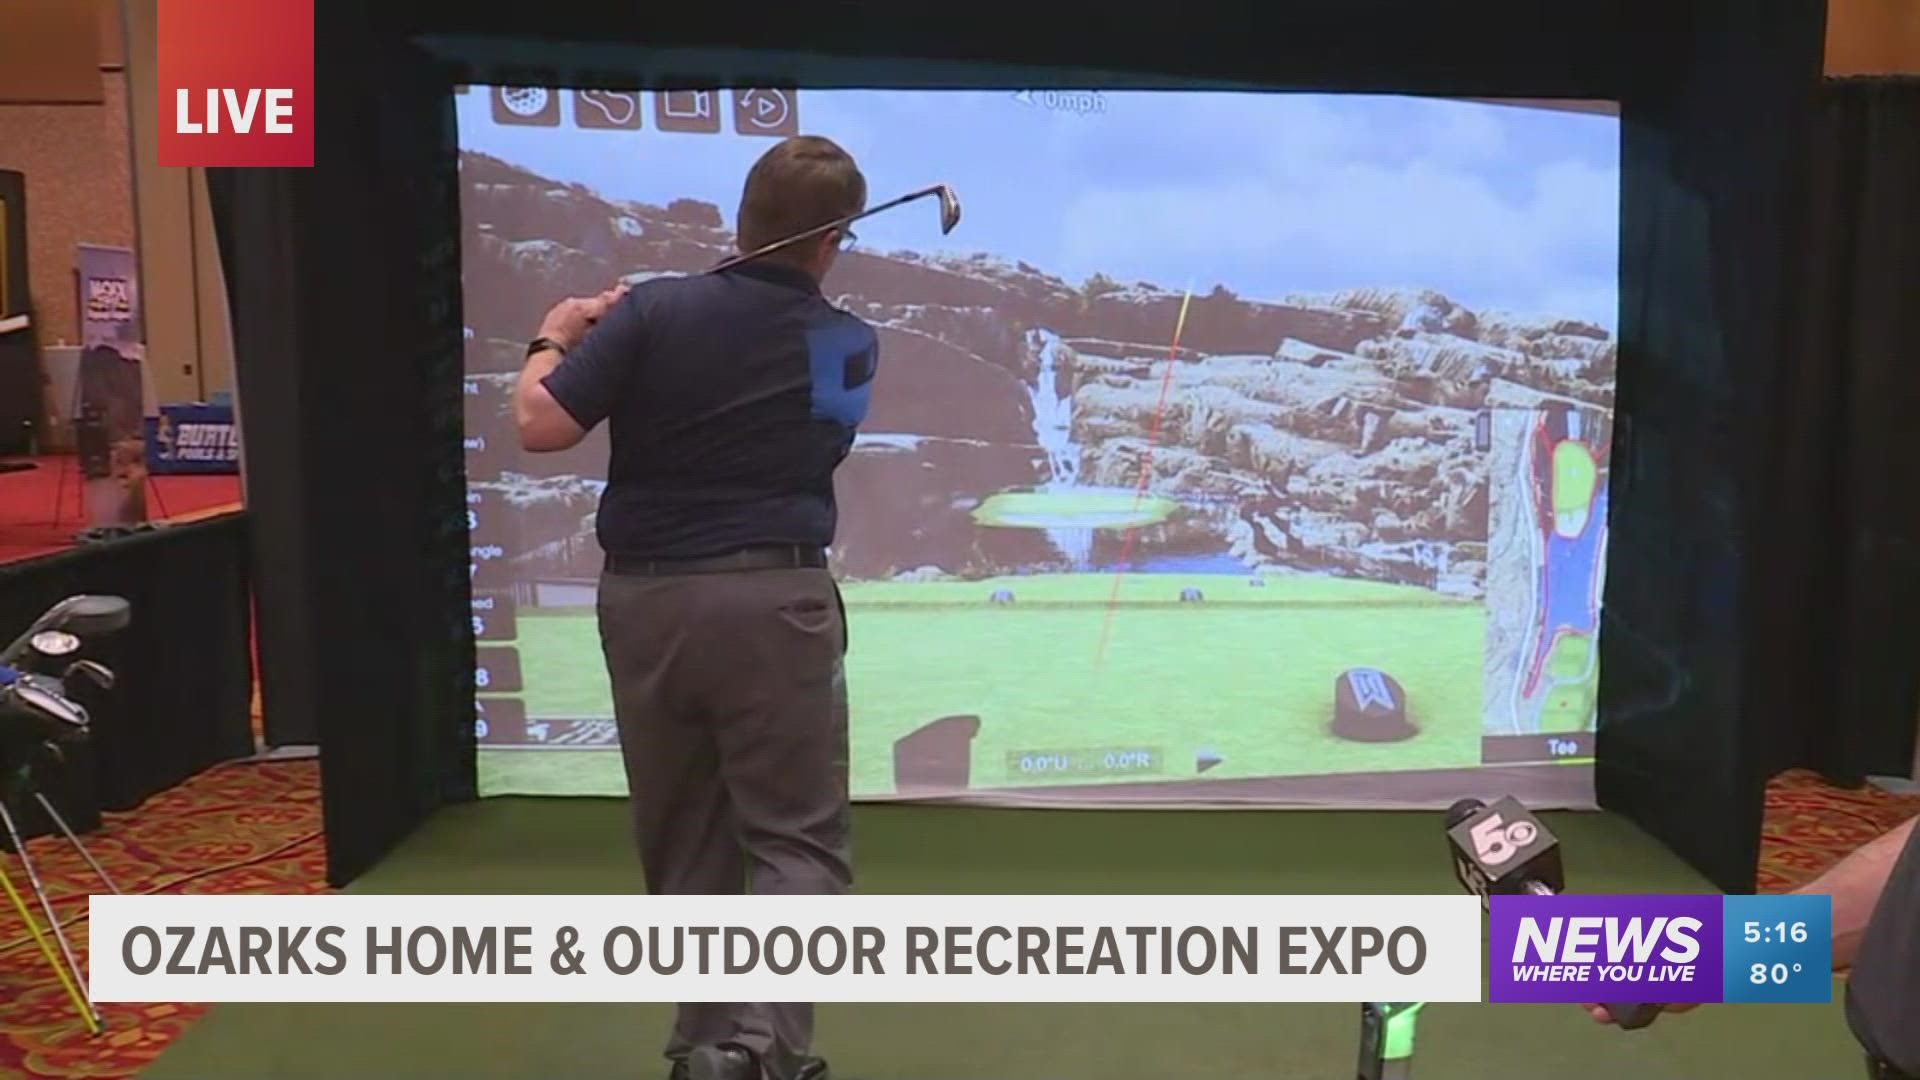 Outdoor enthusiasts will be able to explore and shop with various outdoor exhibitors, all under one roof Oct. 21-23 at the Rogers Convention Center.